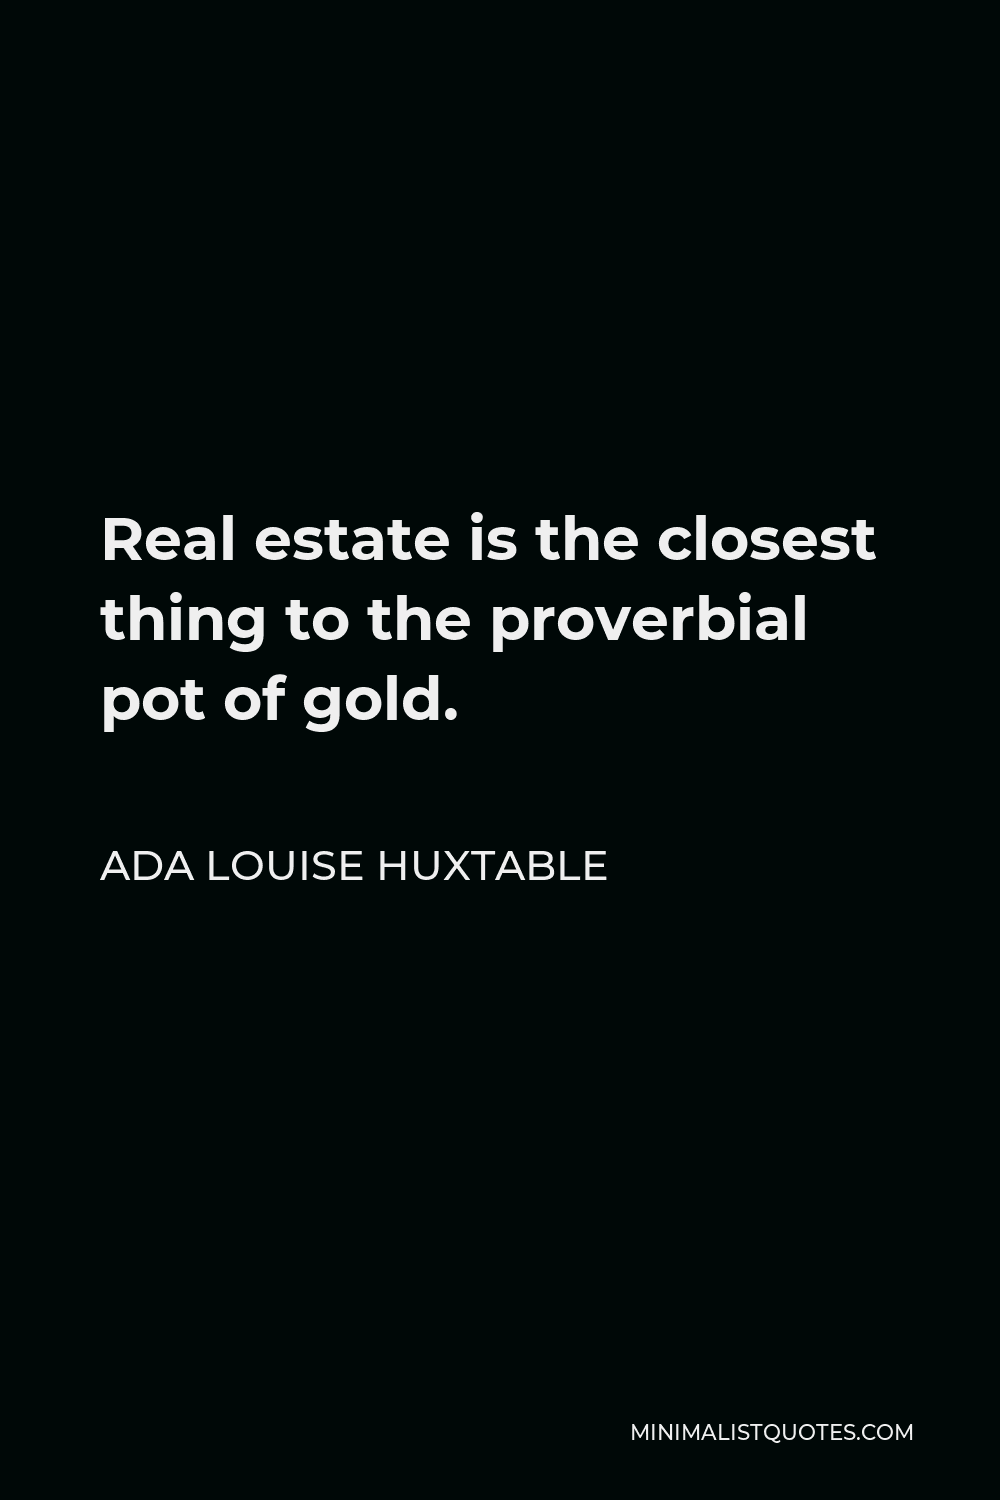 Ada Louise Huxtable Quote - Real estate is the closest thing to the proverbial pot of gold.